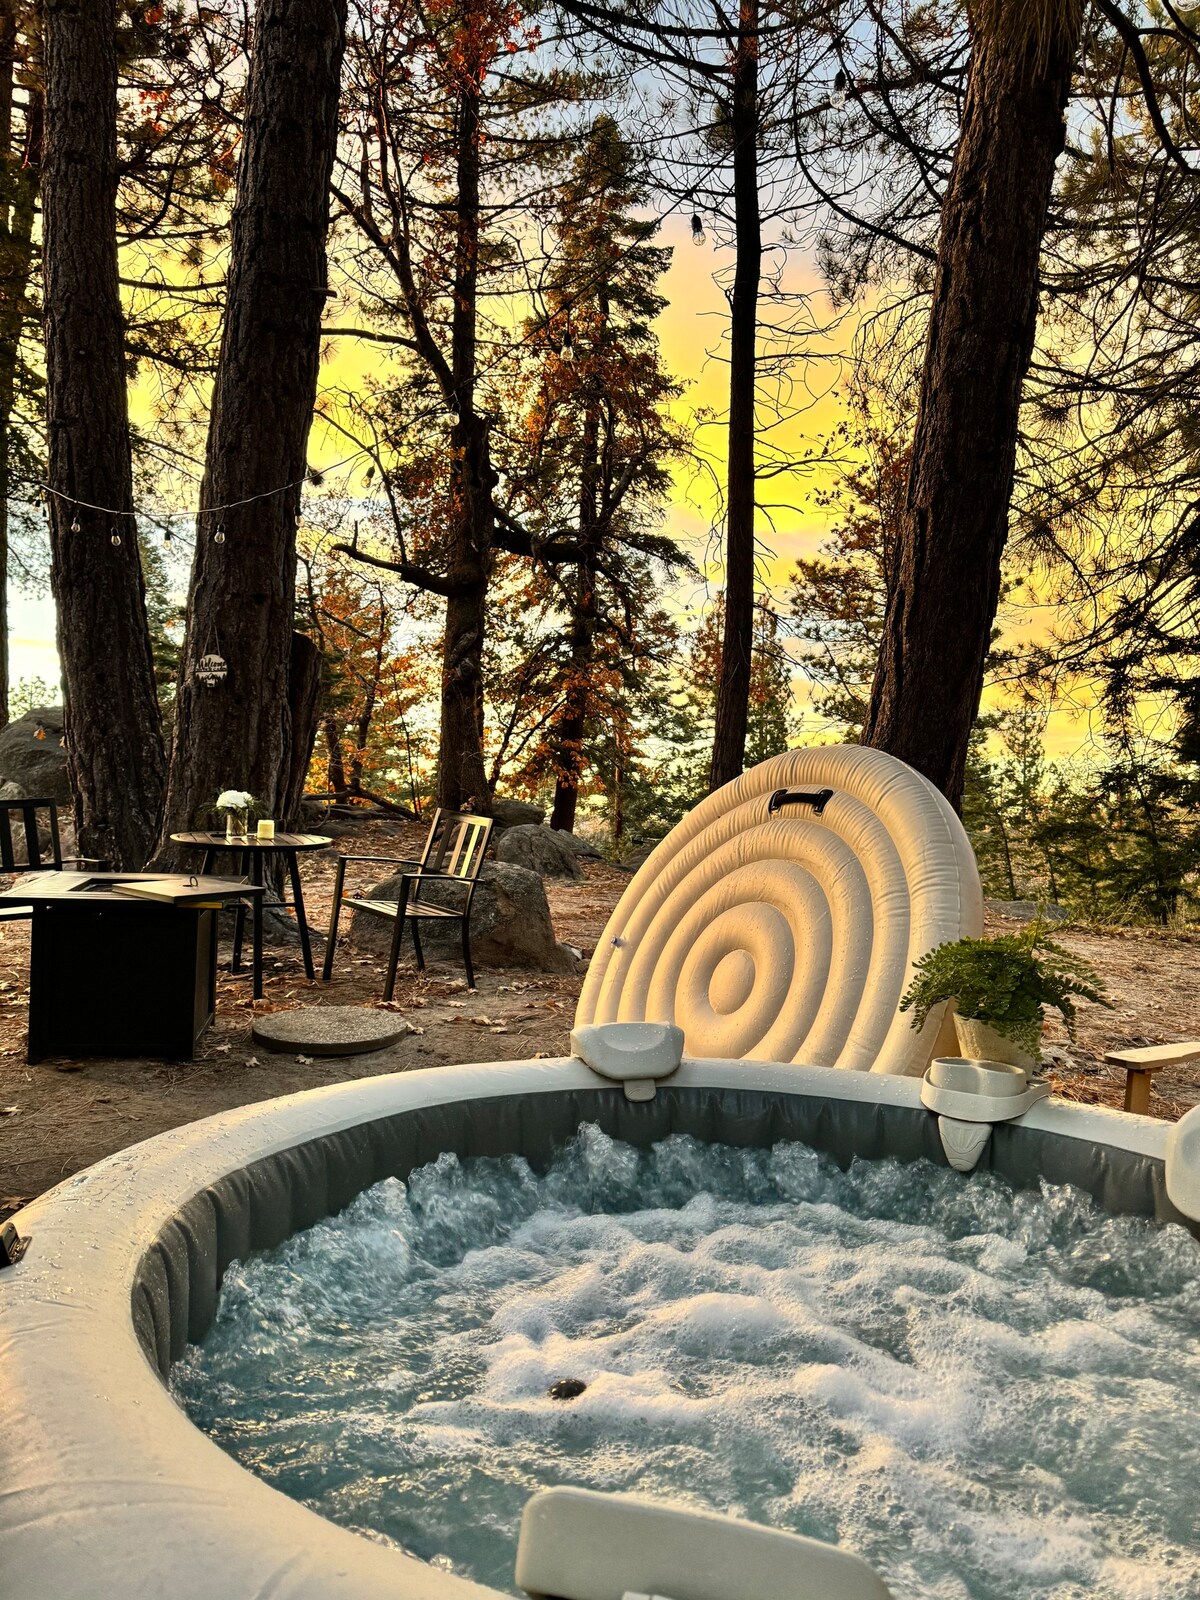 The Scandia “A-Frame Chalet” Fireplace & Hot tub